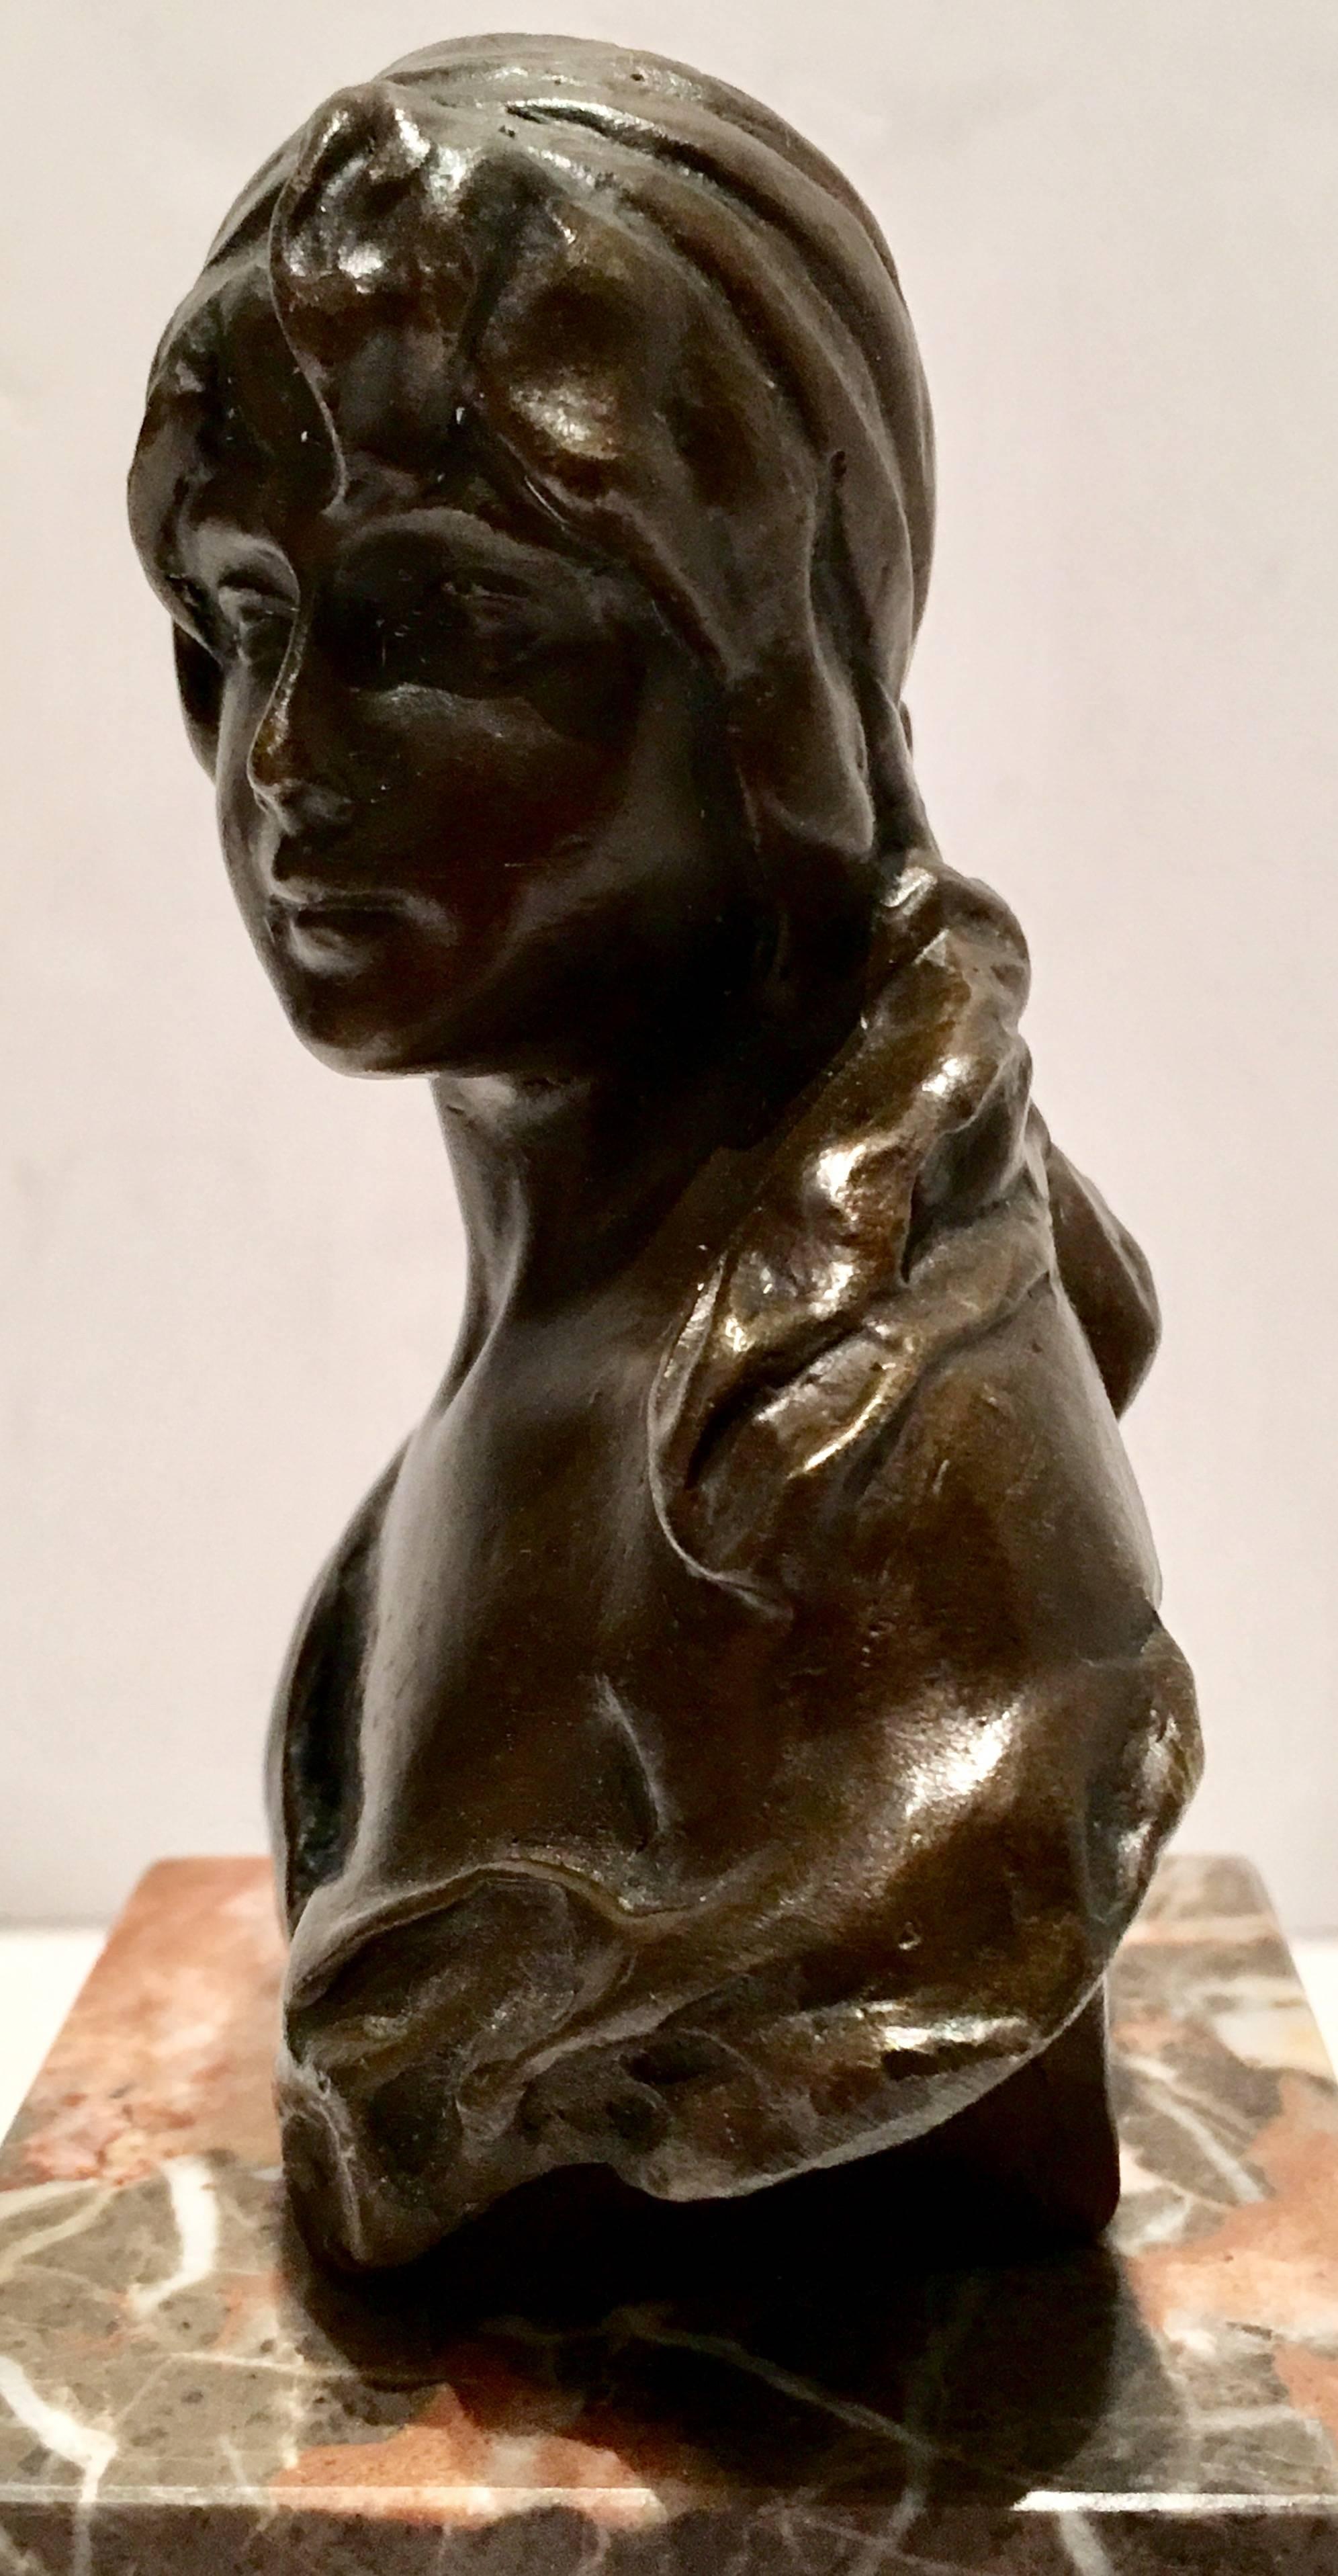 20th Century French Art Nouveau Style Bronze Female Bust Sculpture on Marble Stand